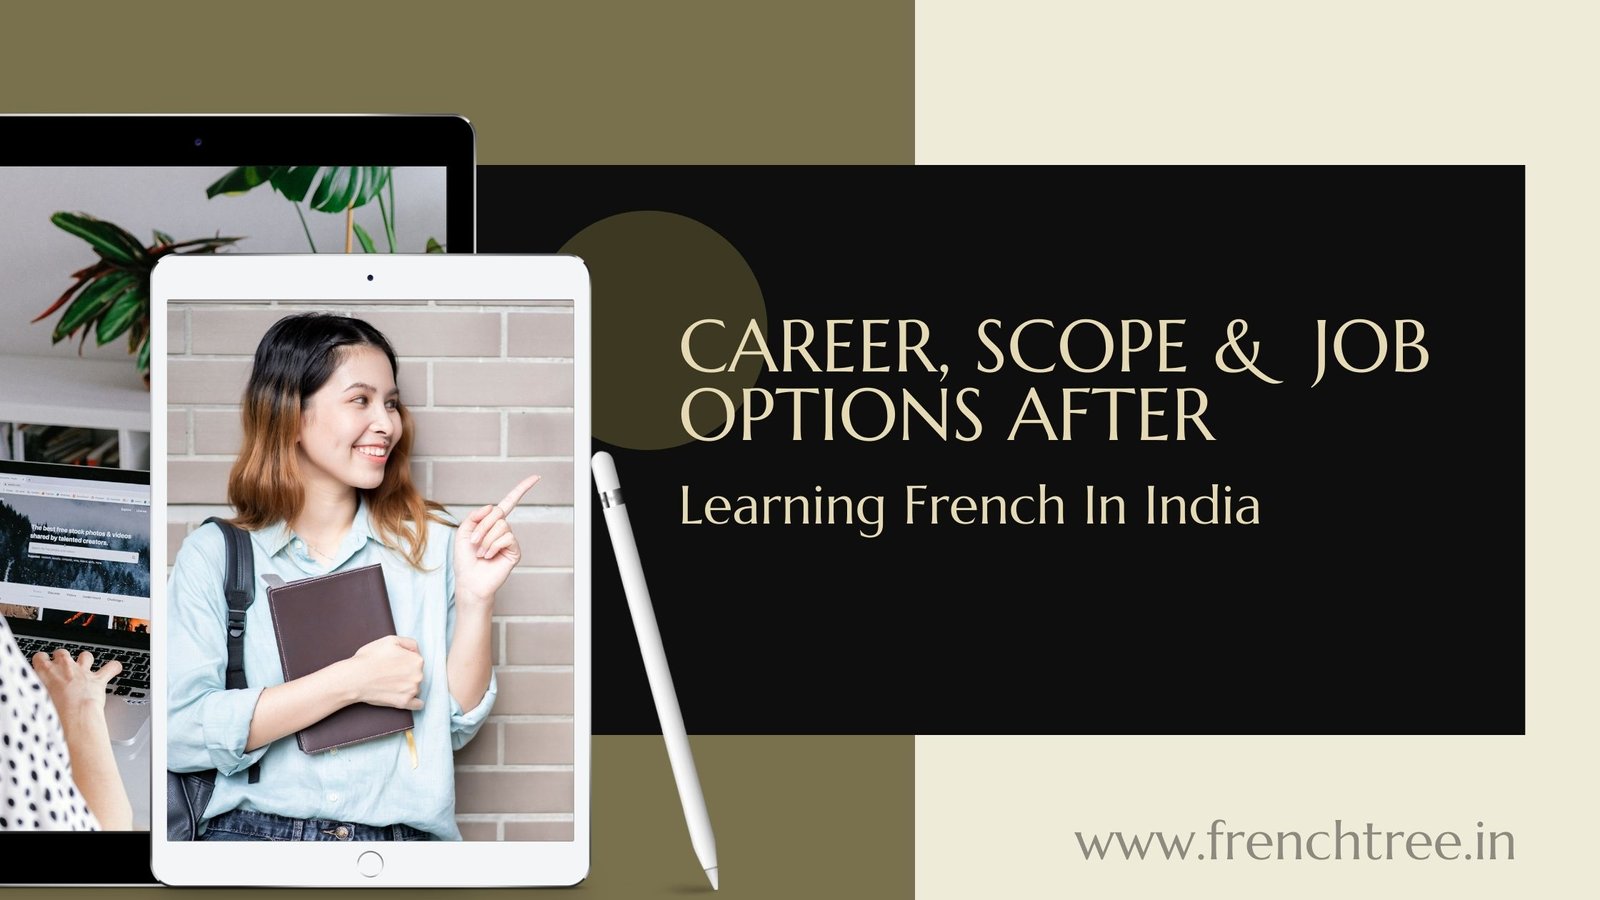 Career, Scope & Job Options After Learning French In India